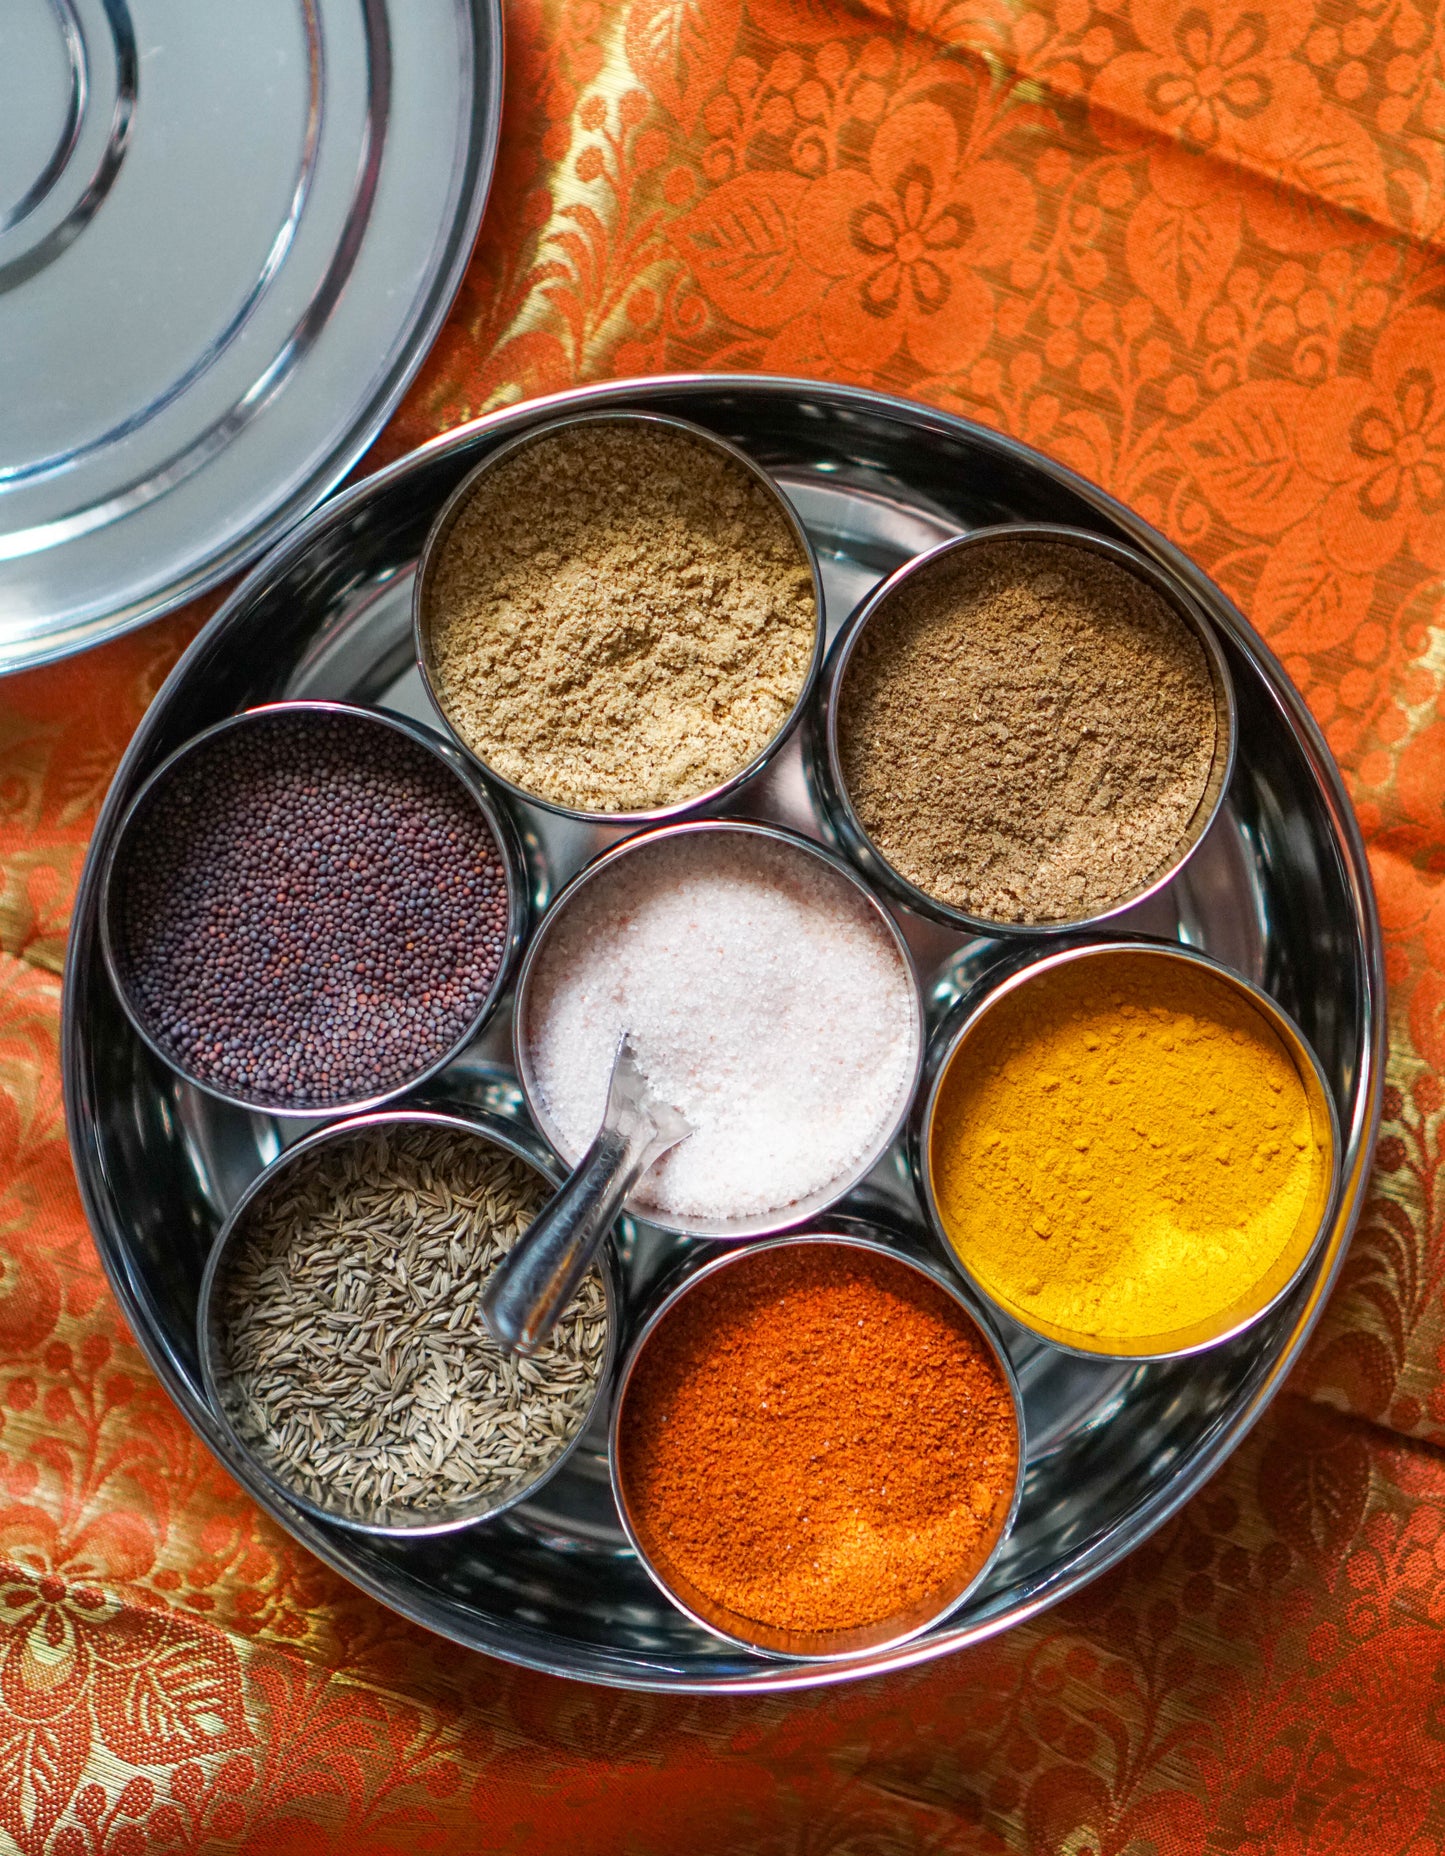 Indian Spice Tray (Spice Box or Spice Rack - also known as Masala Dani or Masala Dabba), Stainless Steel